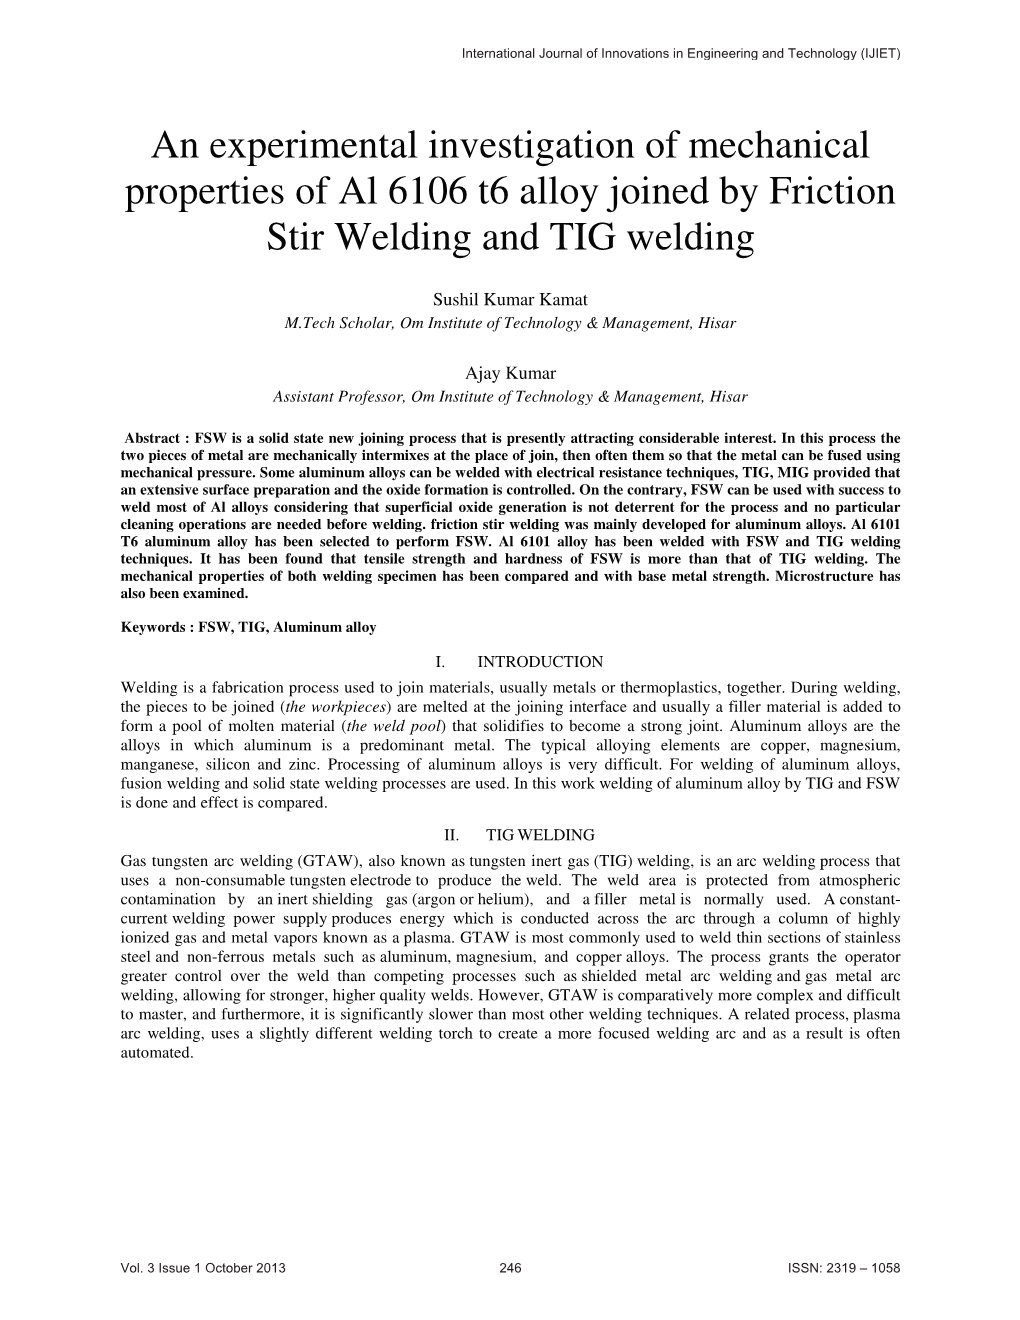 An Experimental Investigation of Mechanical Properties of Al 6106 T6 Alloy Joined by Friction Stir Welding and TIG Welding